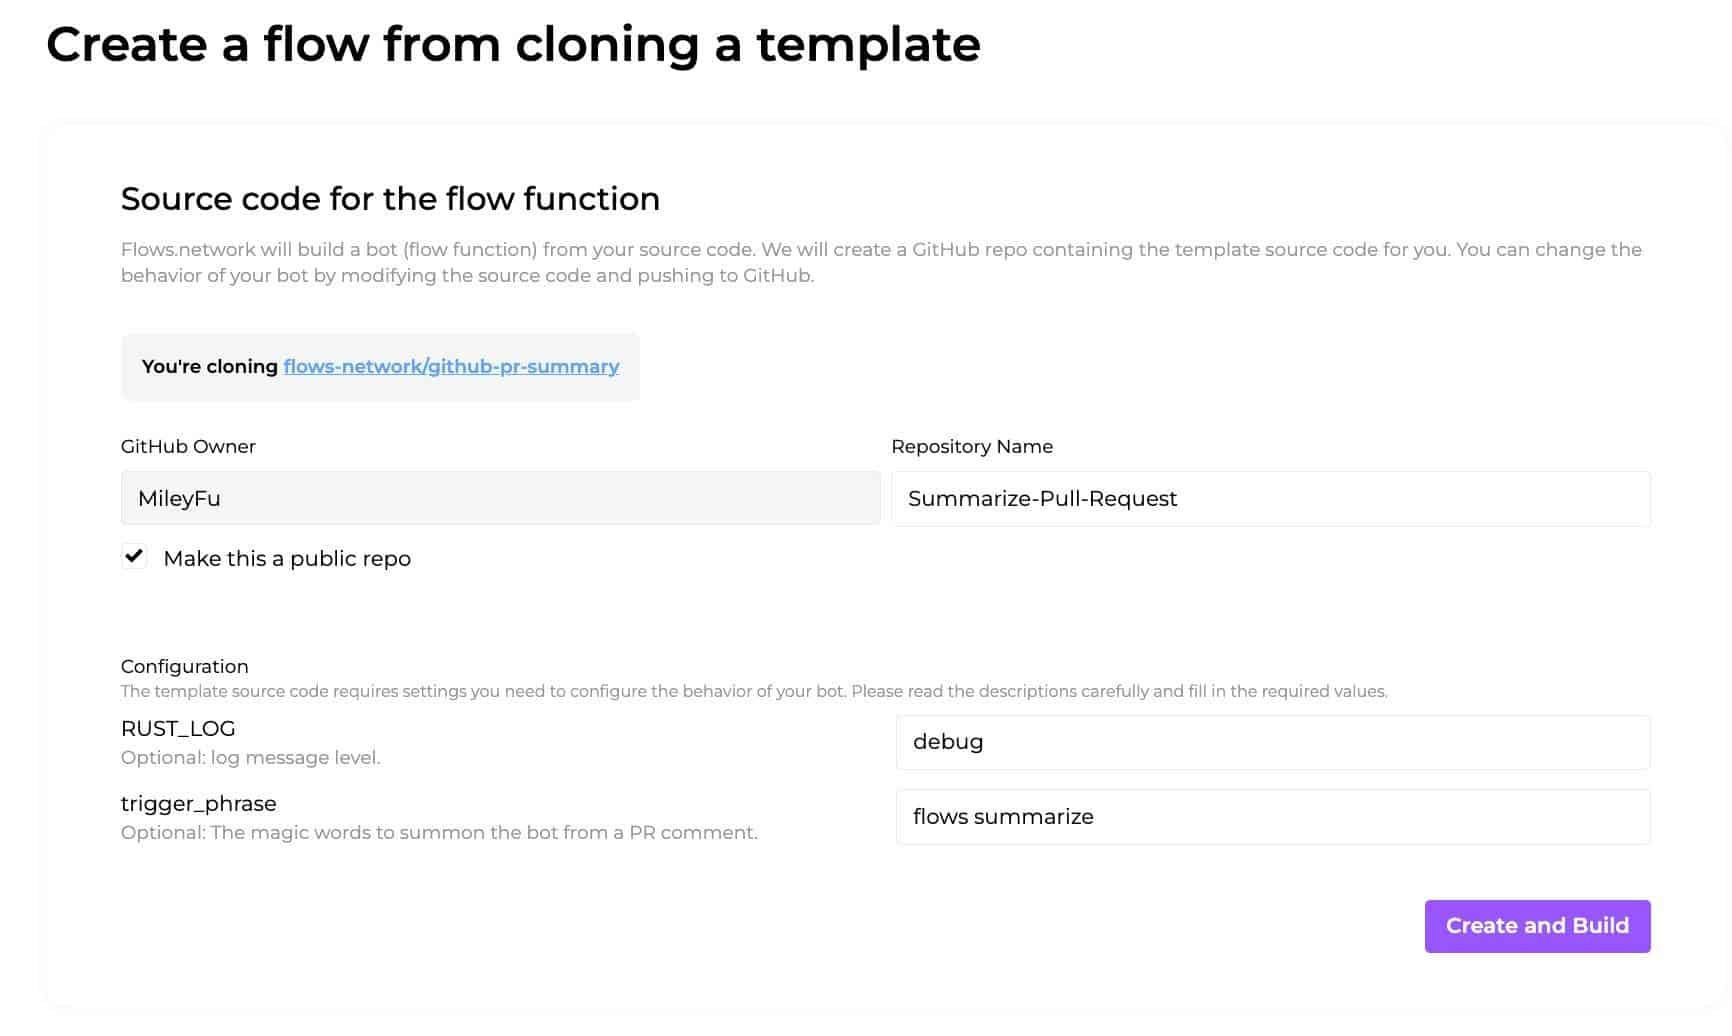 Screenshot showing create a flow from cloning a template page